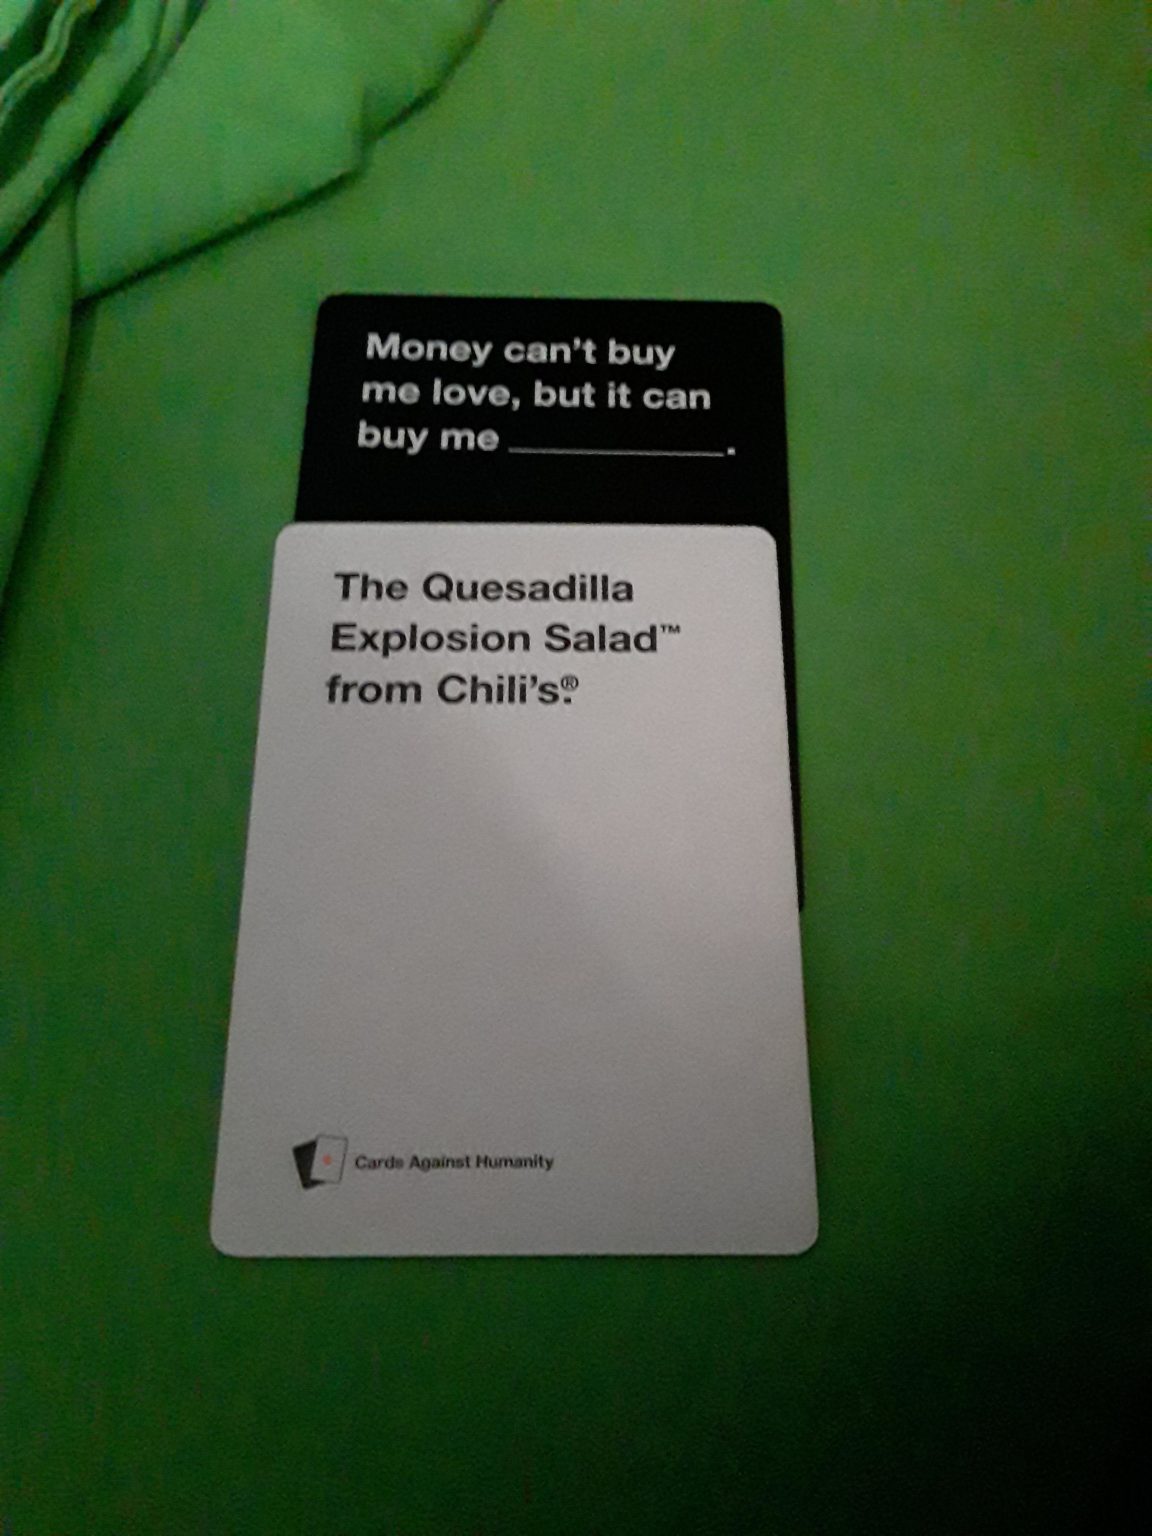 cards against humanity online multiplayer with pictures